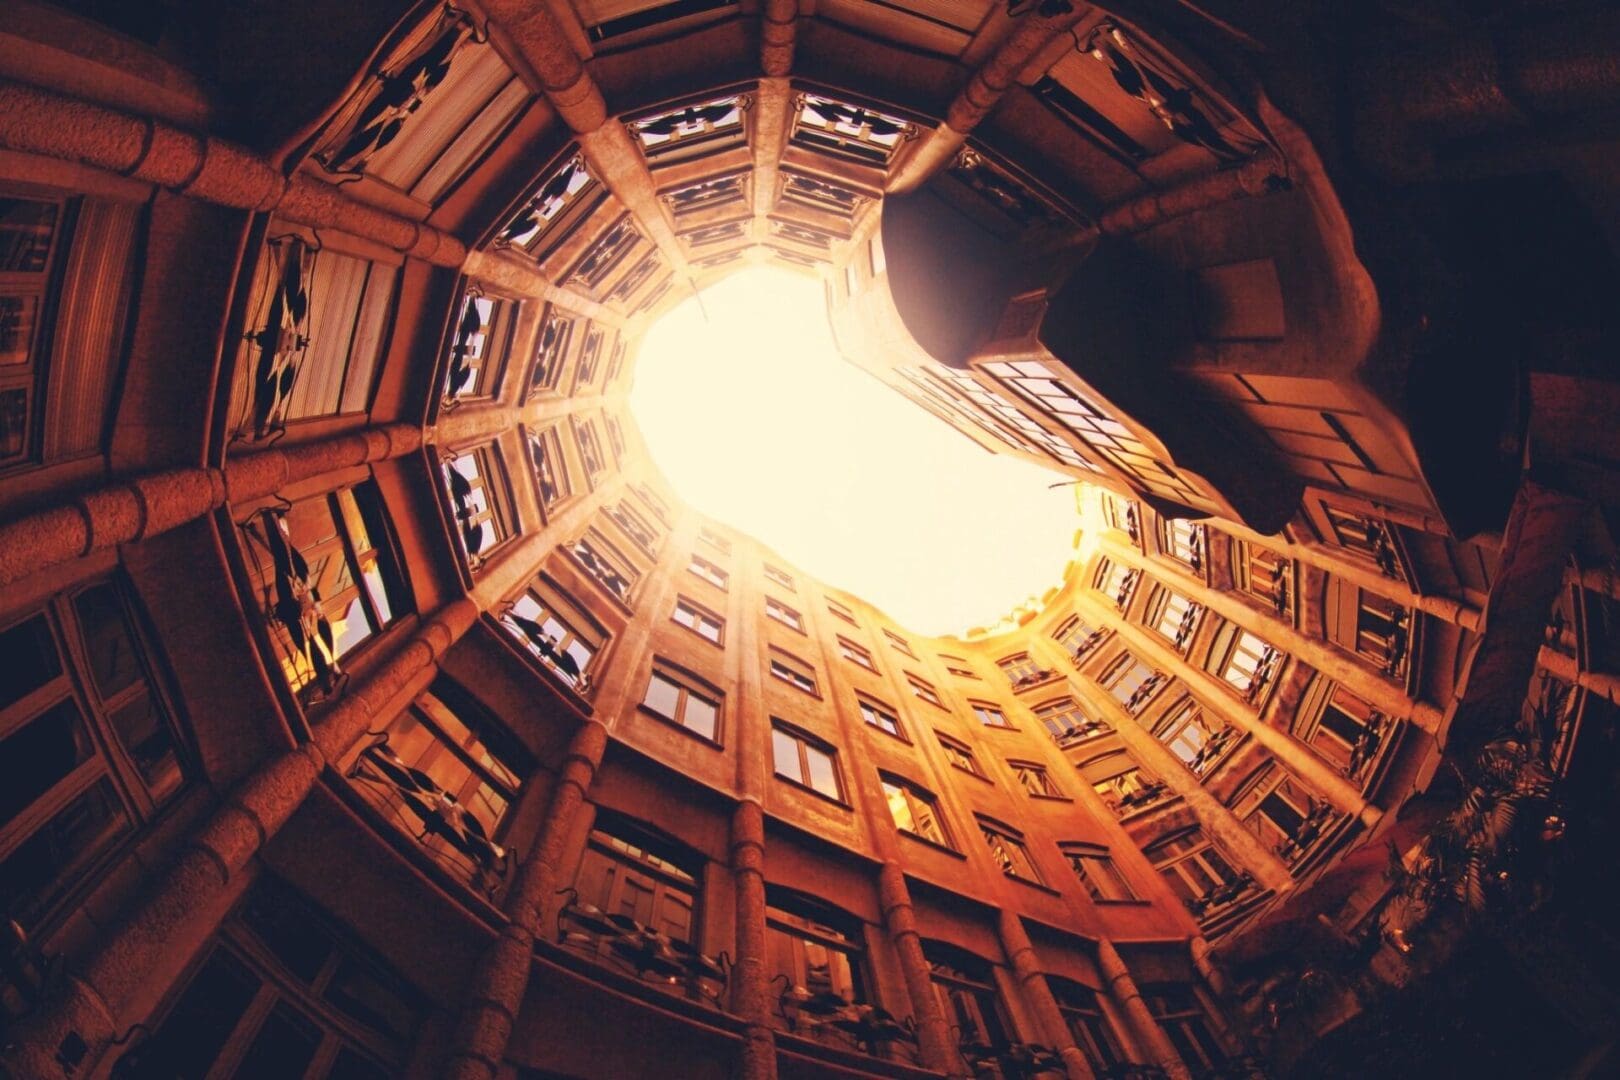 Looking up at a circular courtyard surrounded by ornate buildings with the sun shining directly above.